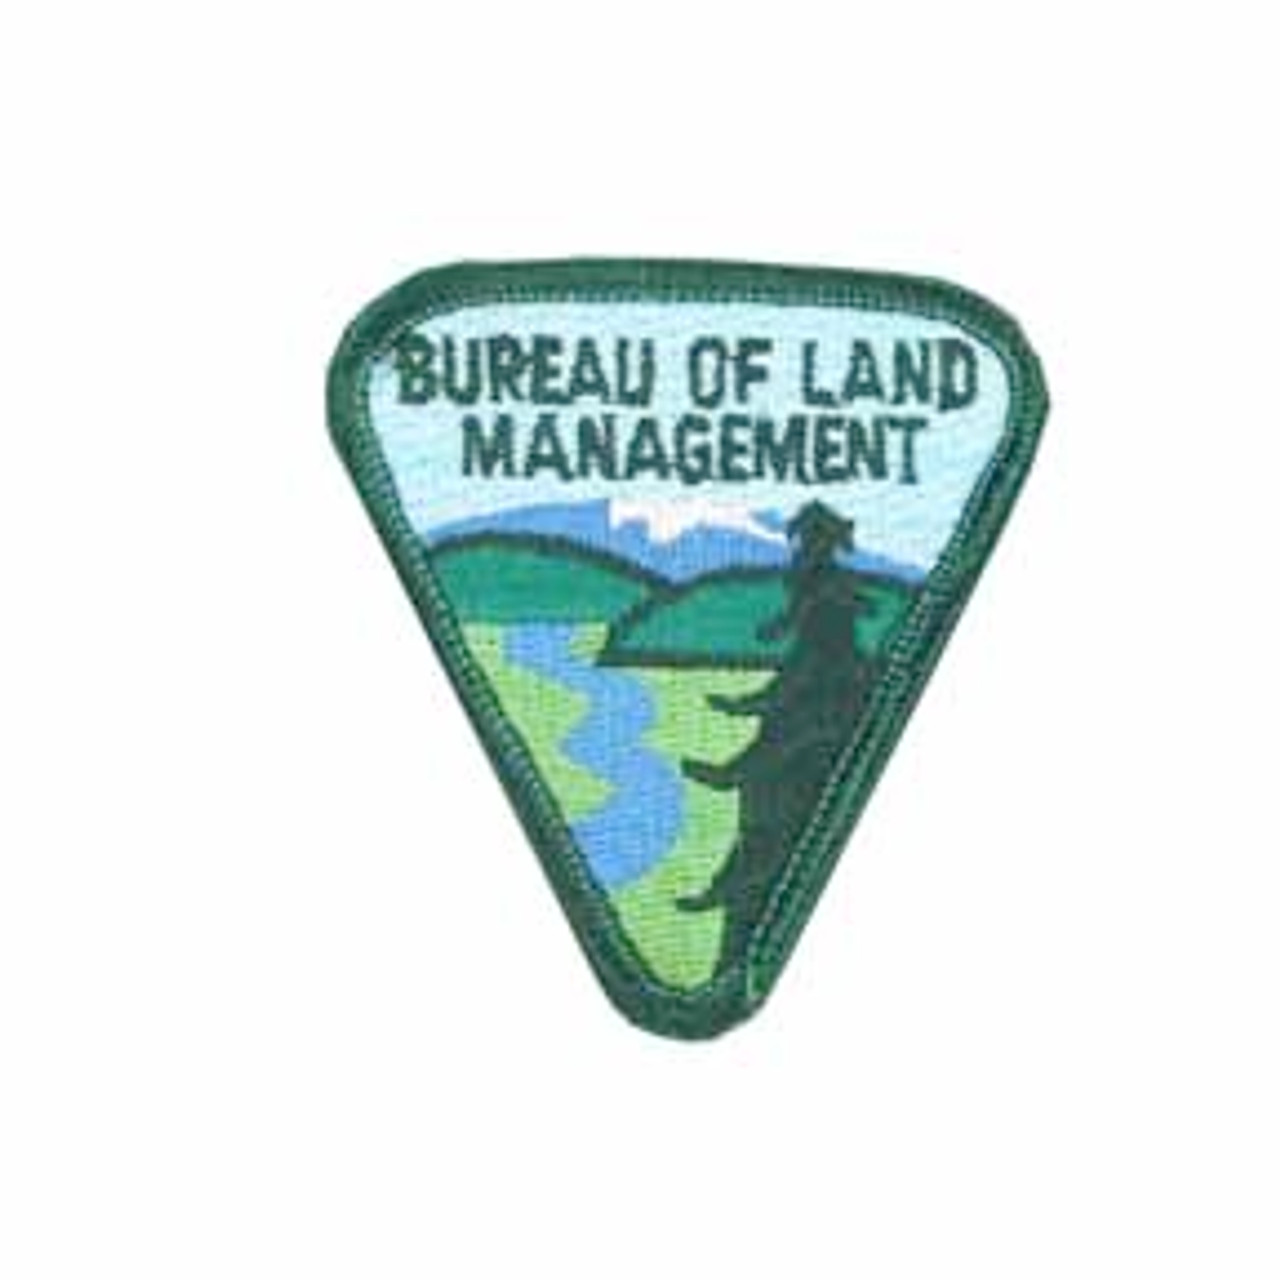 Bureau of Land Management Patch with Full Text